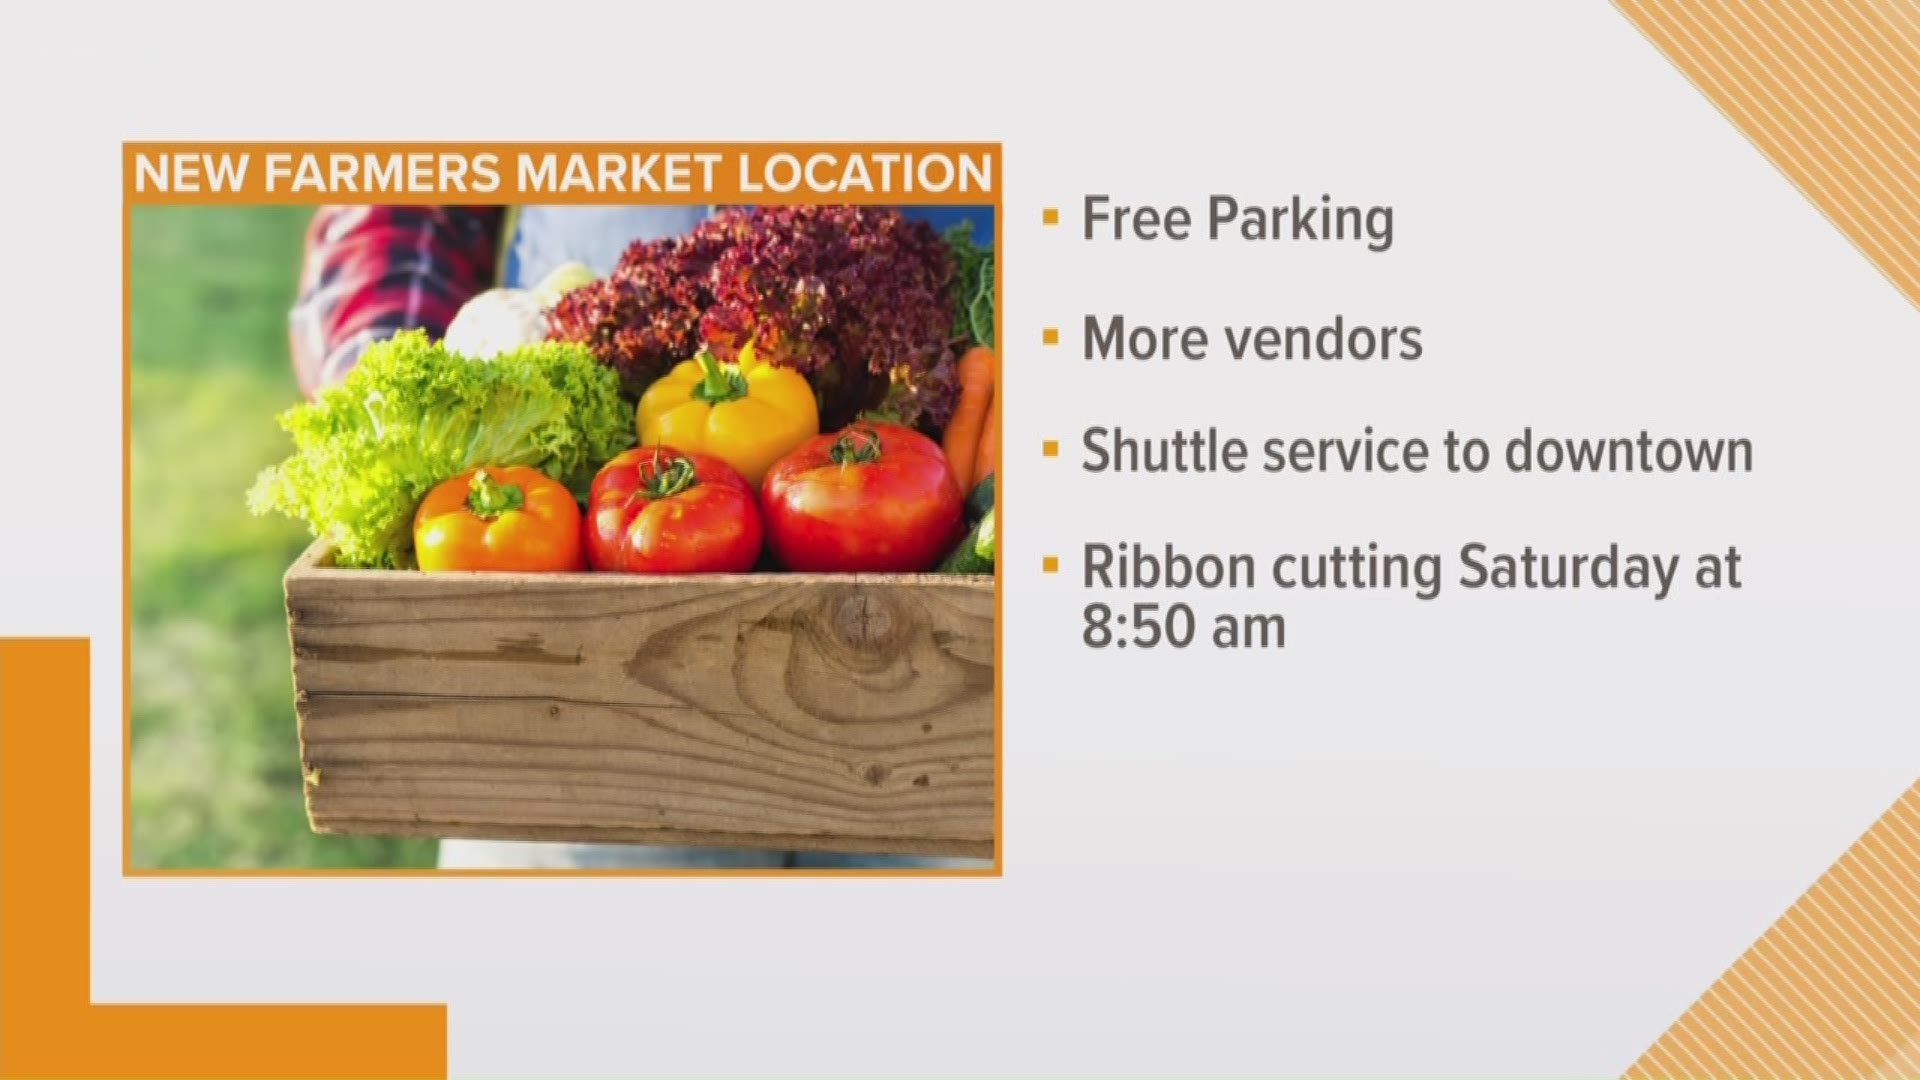 Organizers say there will be a free shuttle service to and from the market.